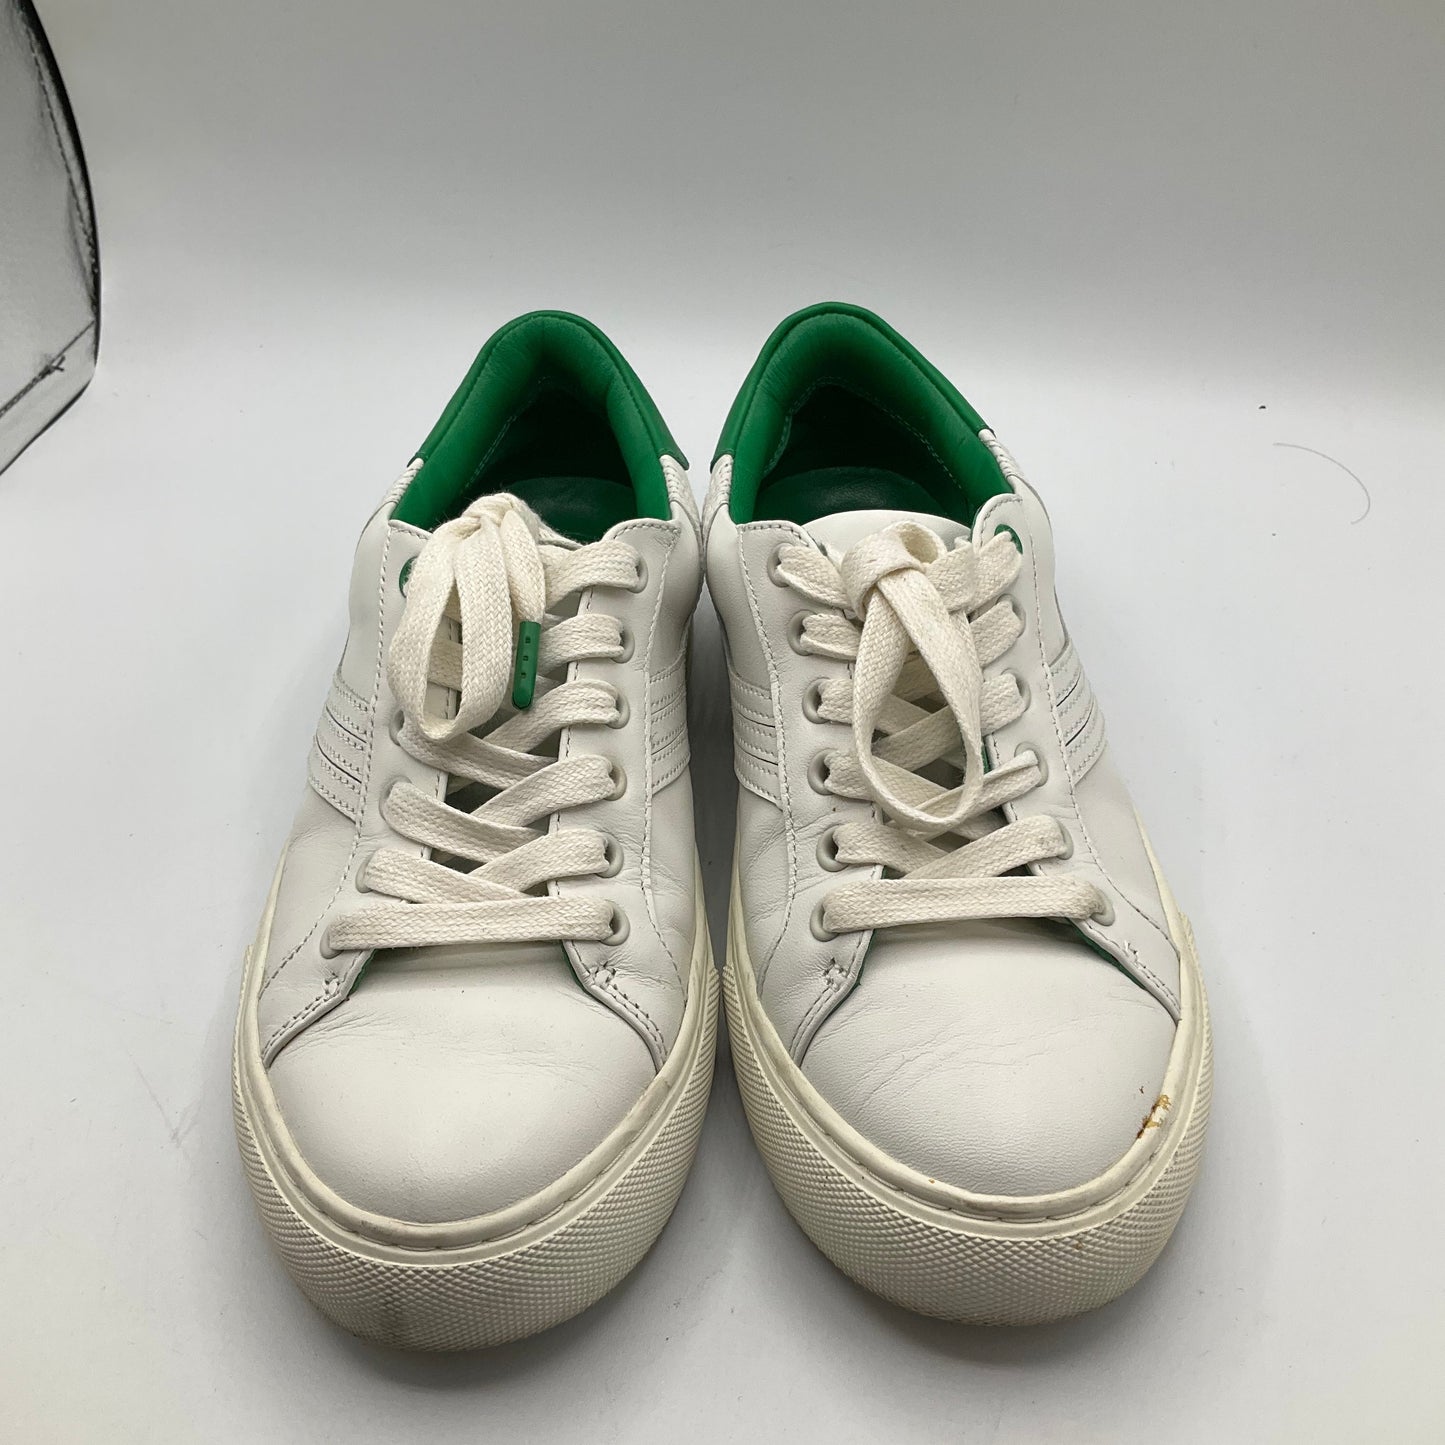 White Shoes Sneakers Tory Burch, Size 6.5